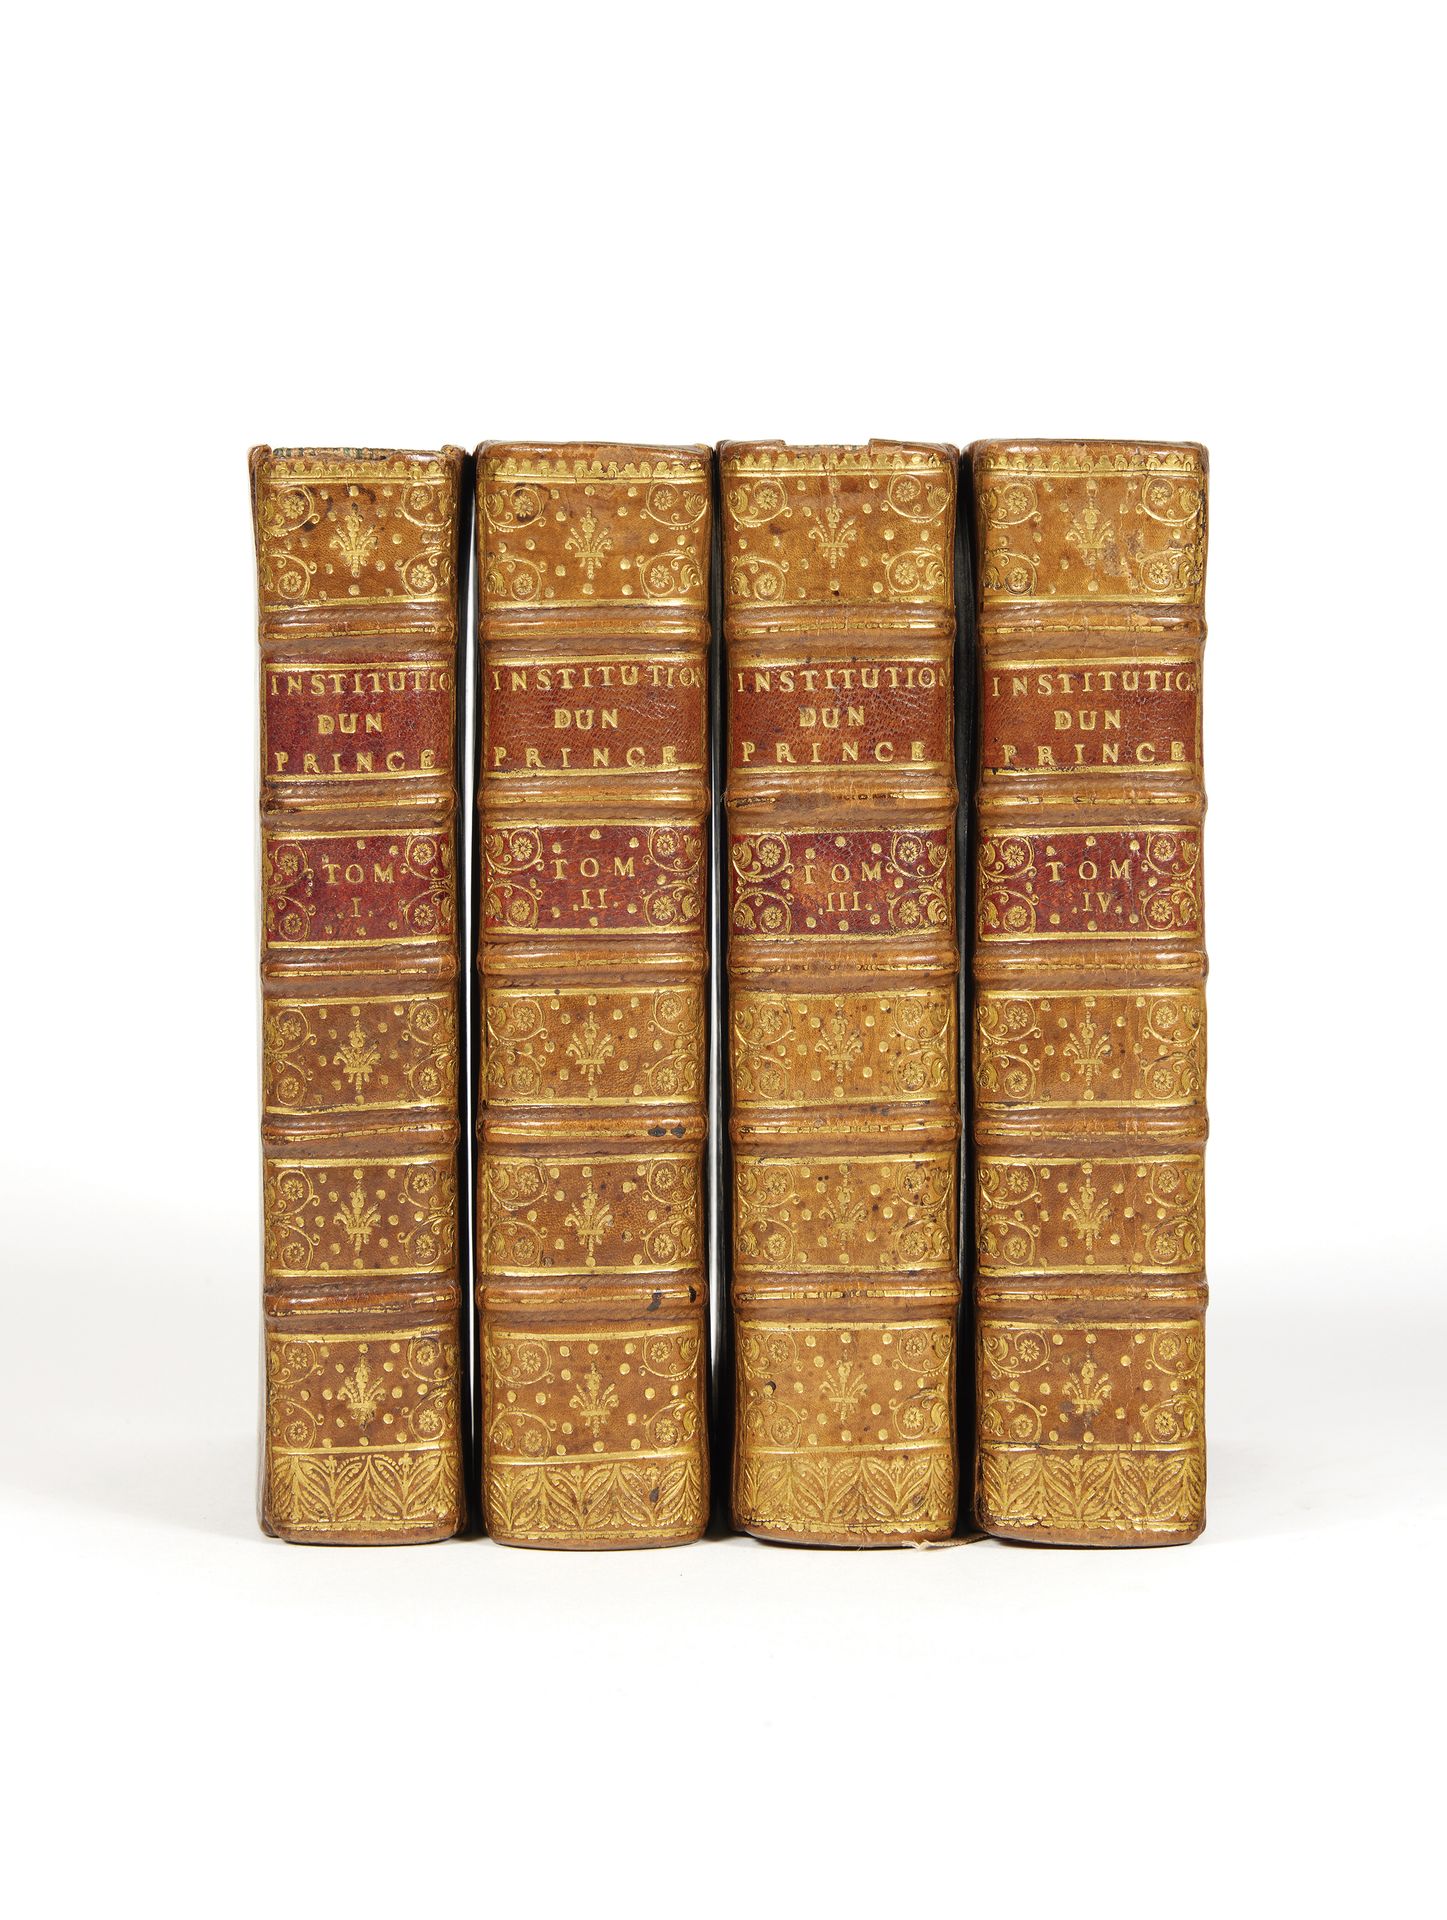 DUGUET, Jacques-Joseph, abbé Institution of a Prince: or Treatise on the Qualiti&hellip;